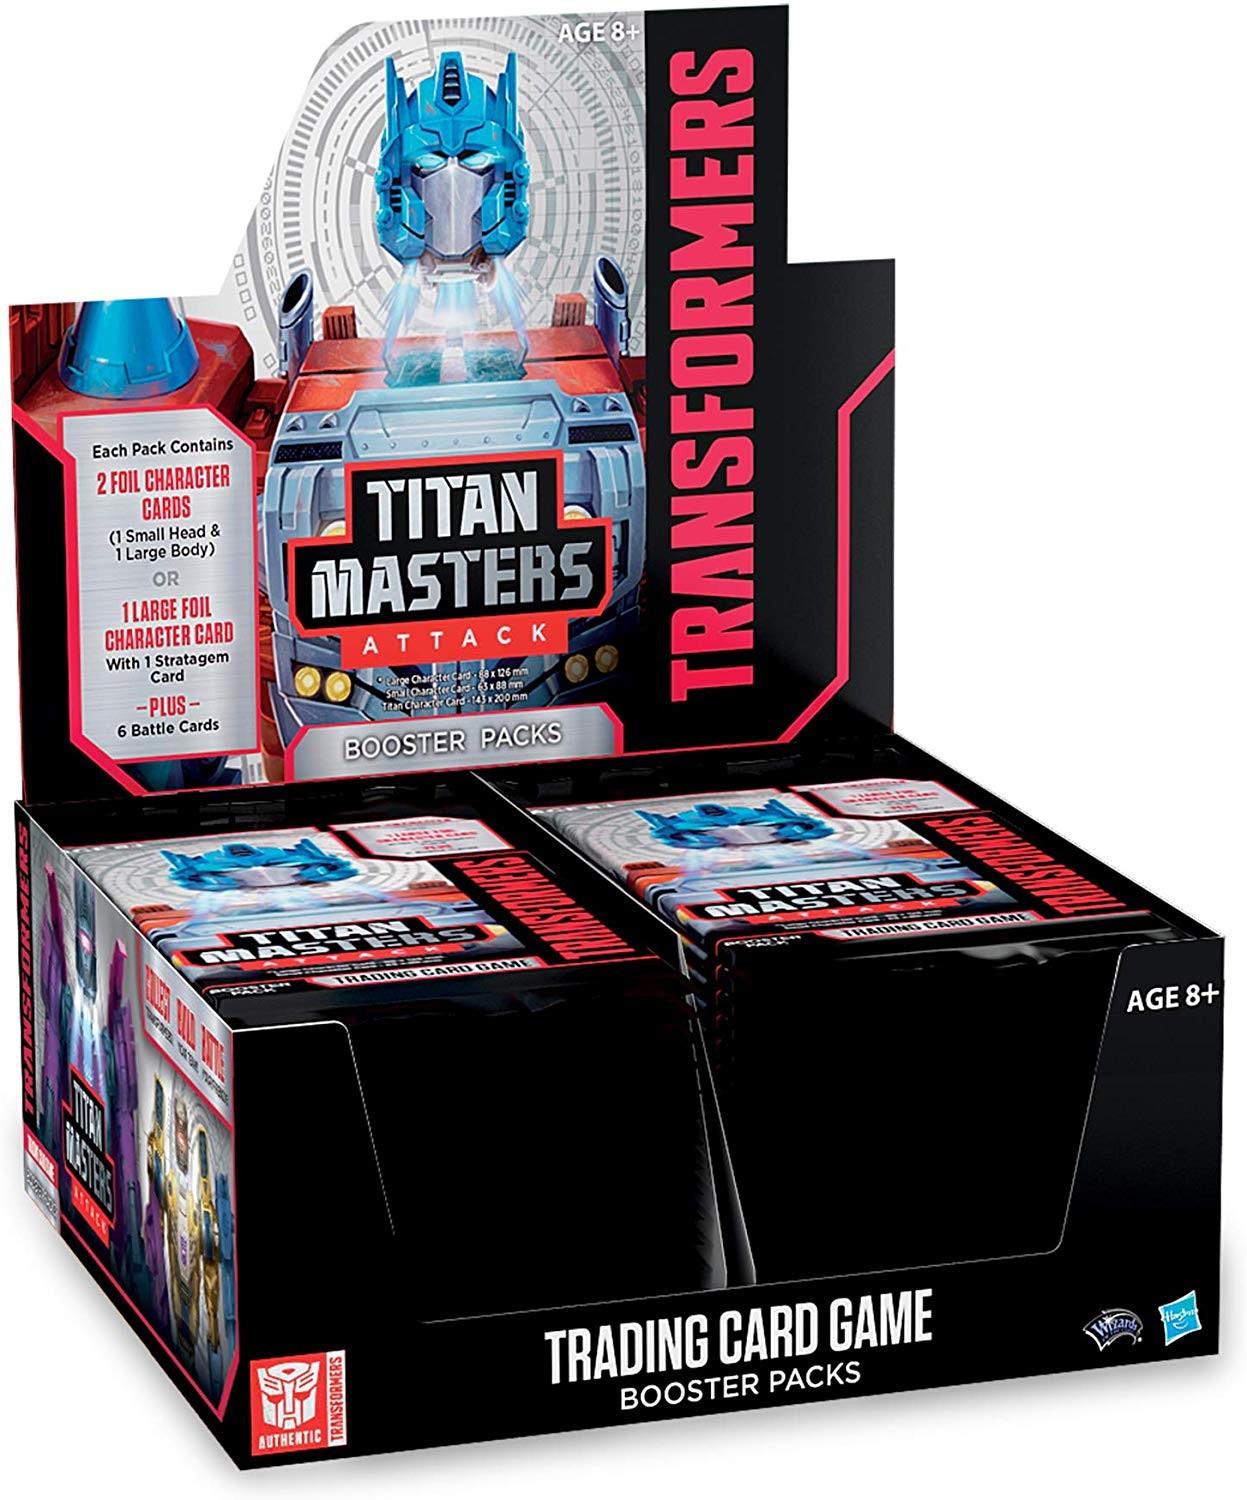 Transformers News: New Titan Masters Attack Expansion Revealed For The Official Transformers Trading Card Game